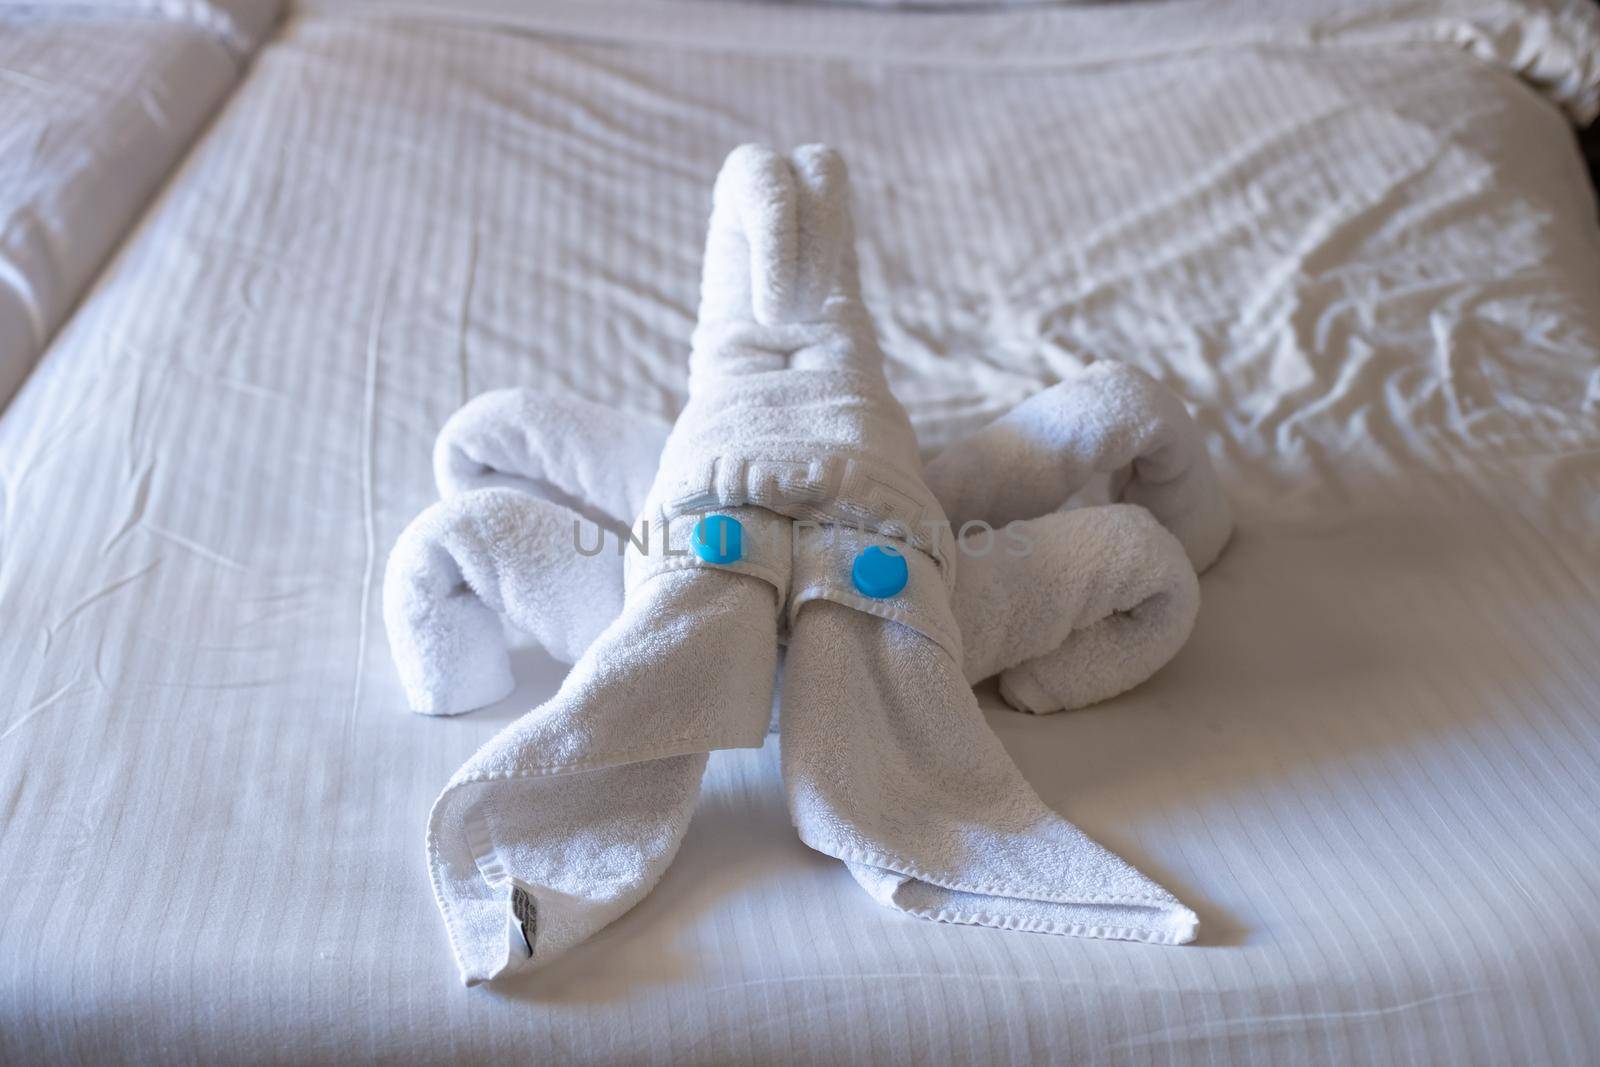 Scorpion figurine made from towels on a bed in a hotel room